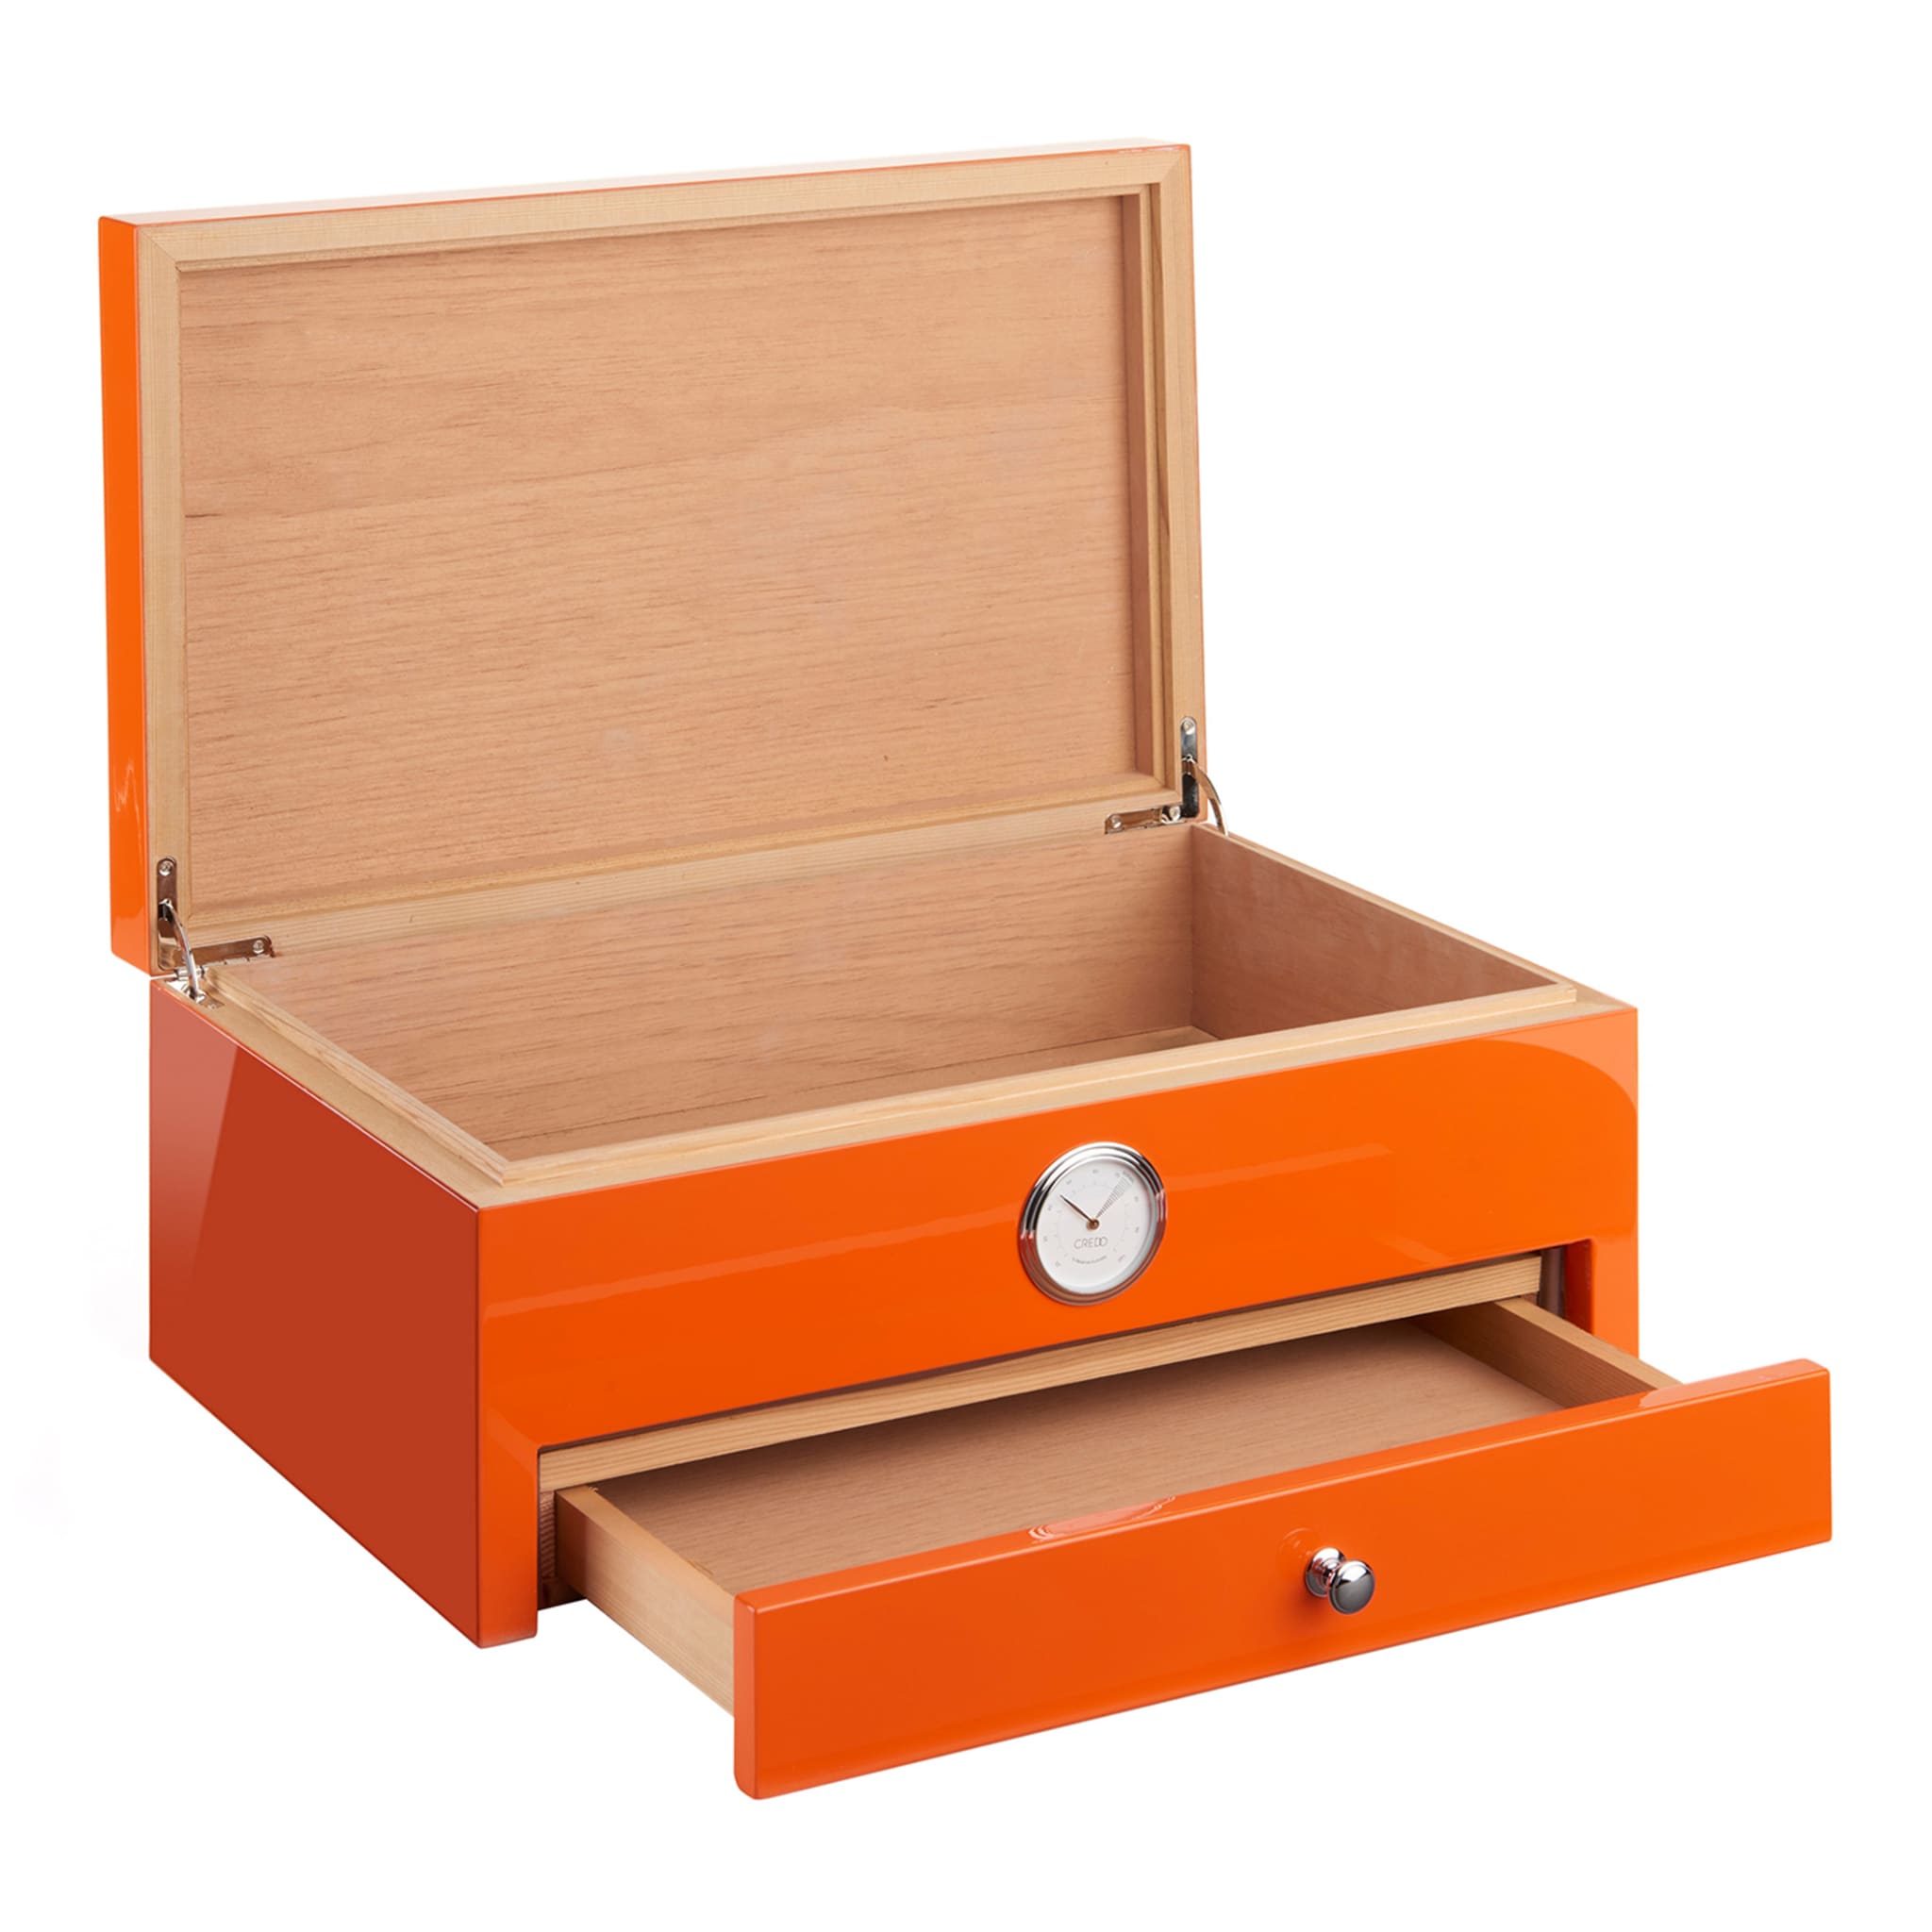 Carribean-inspired Orange Humidor (Special Club Edition)  - Alternative view 1